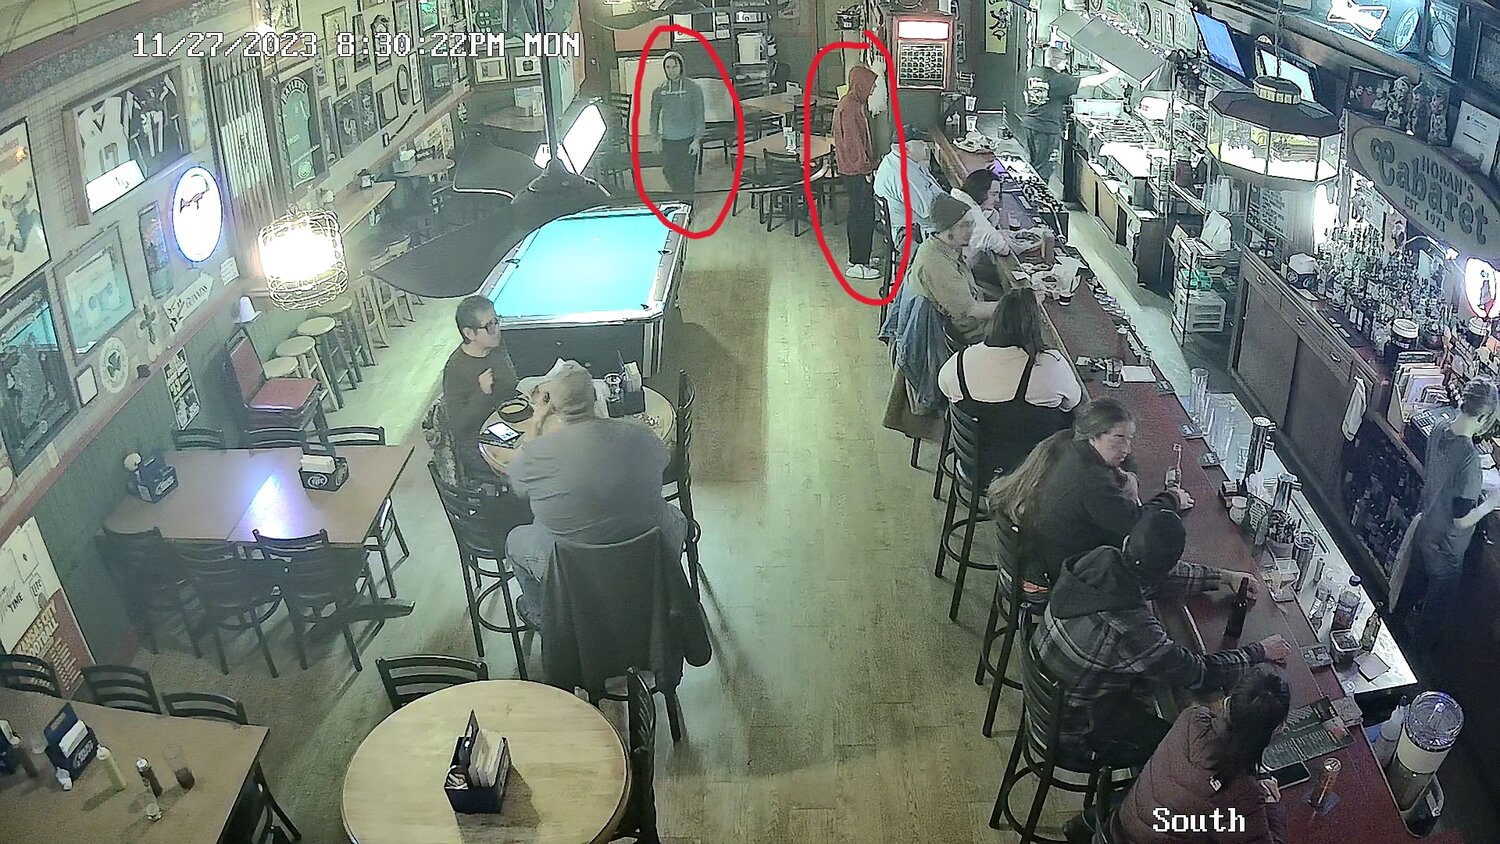 The two circled in the video still image are persons of interest in the ongoing investigation into several burglaries in the city including Monday's at the Cabaret.